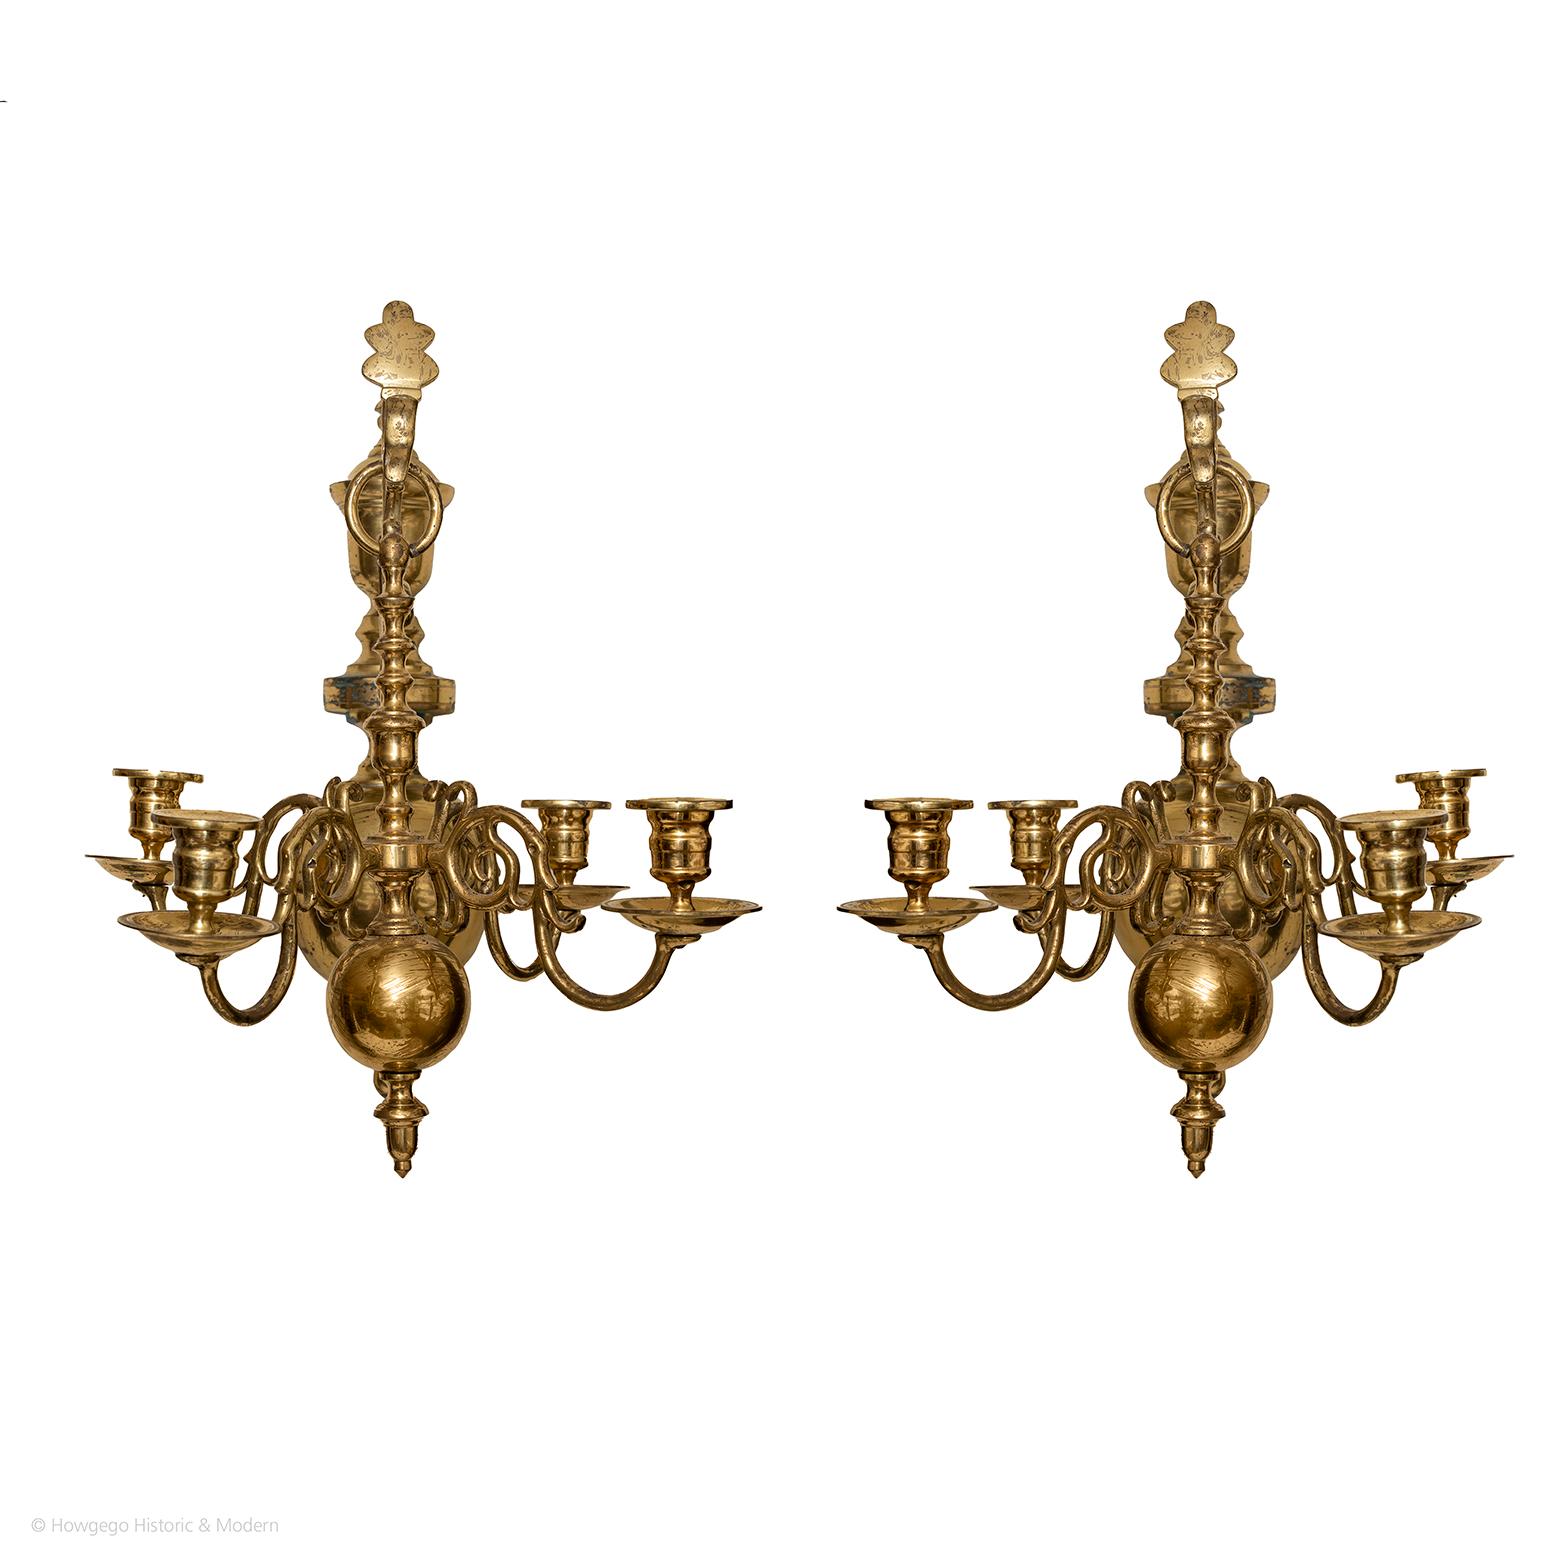 Rare pair of 19th century, antiquarian, dutch sconces in the baroque-style each holding a small 4-arm chandelier
-Versatile can be used as a wall sconce or hanging chandeliers
-Each chandelier has 4 candles throwing a lot of light into the